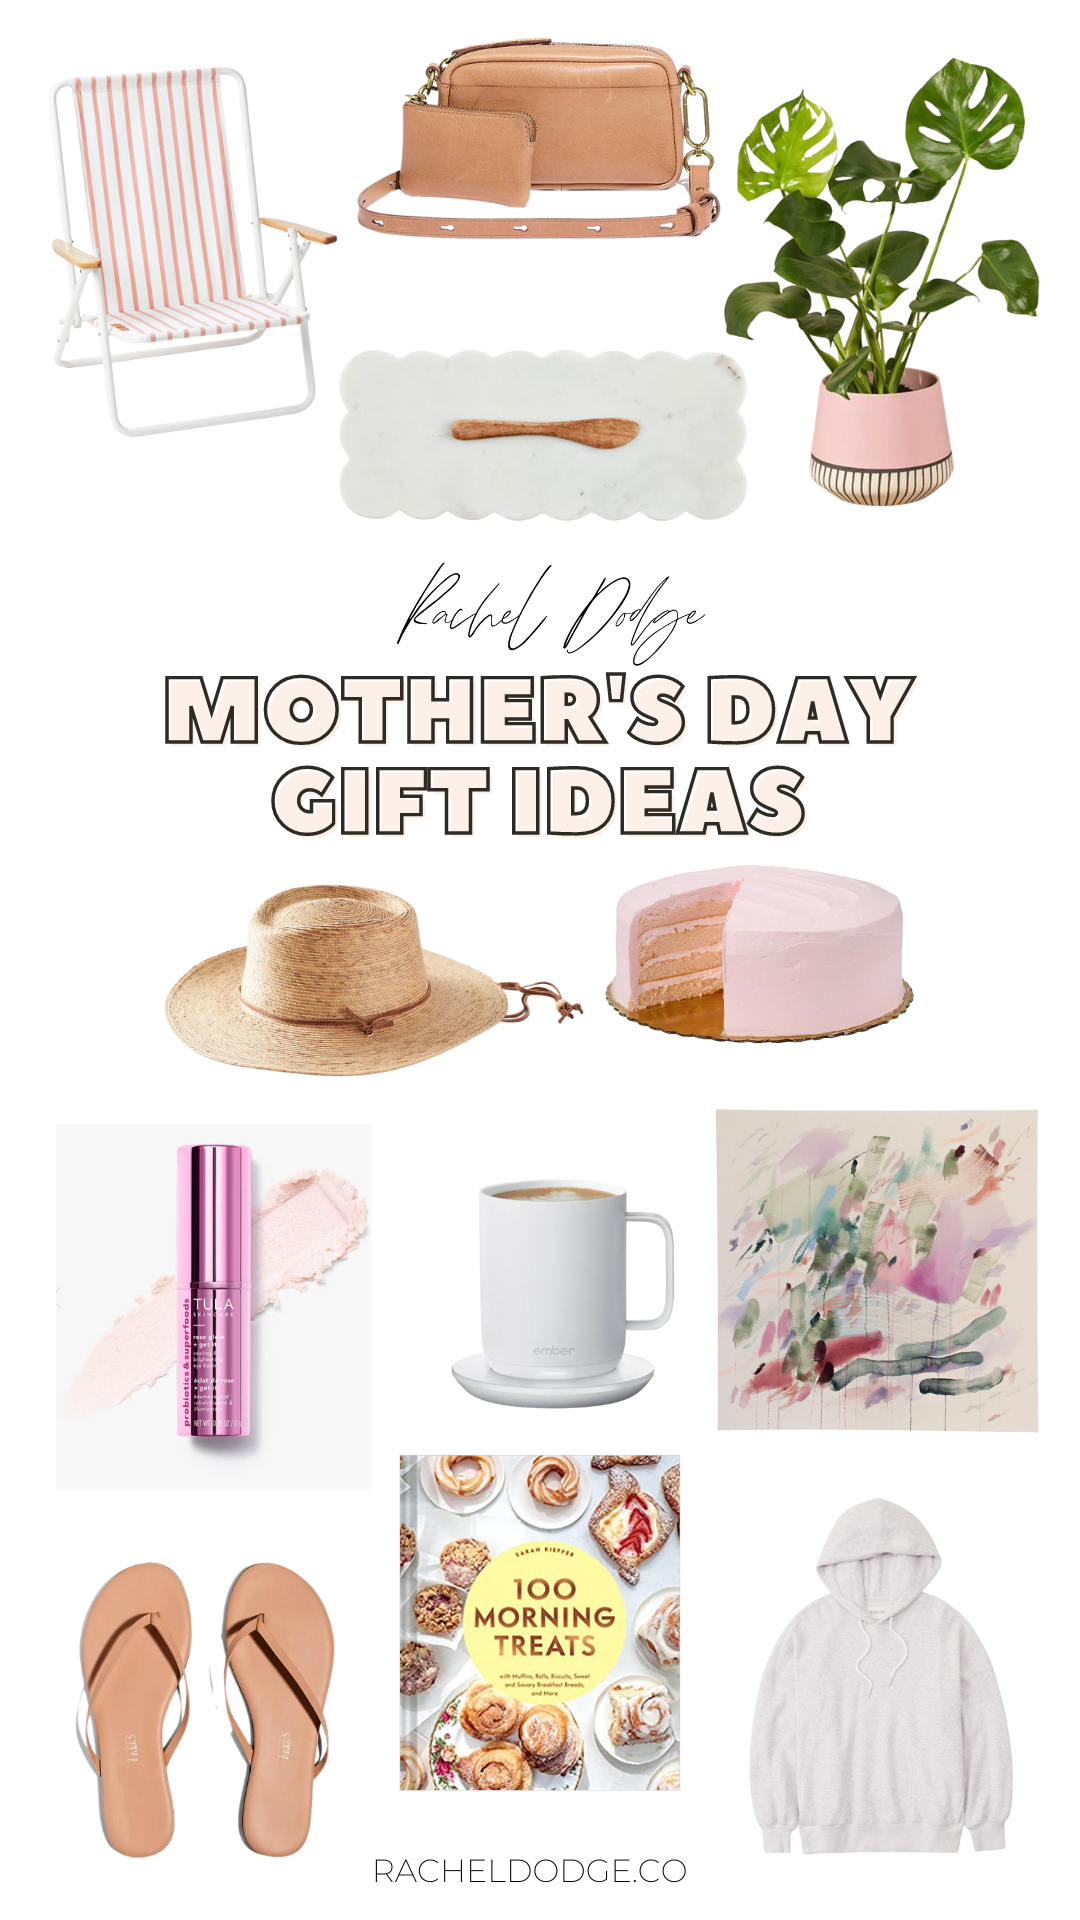 a selection of thoughtful Mother's Day gift ideas